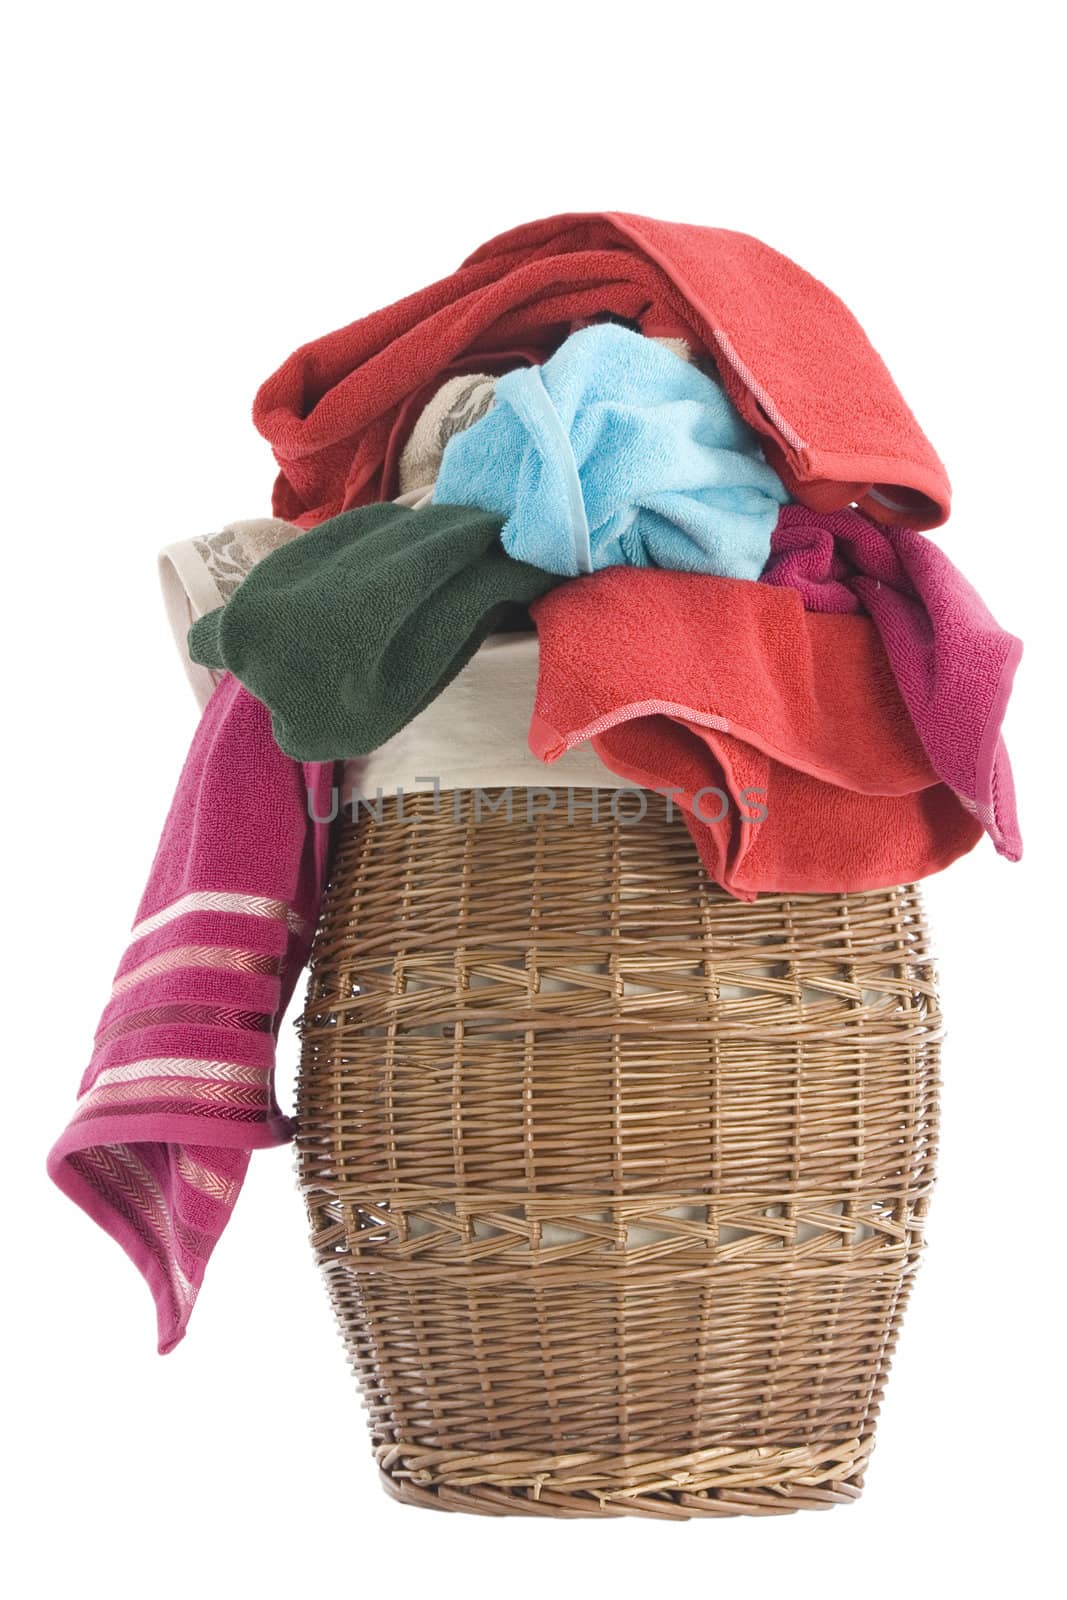 colorful towels in a basket isolated on white background 